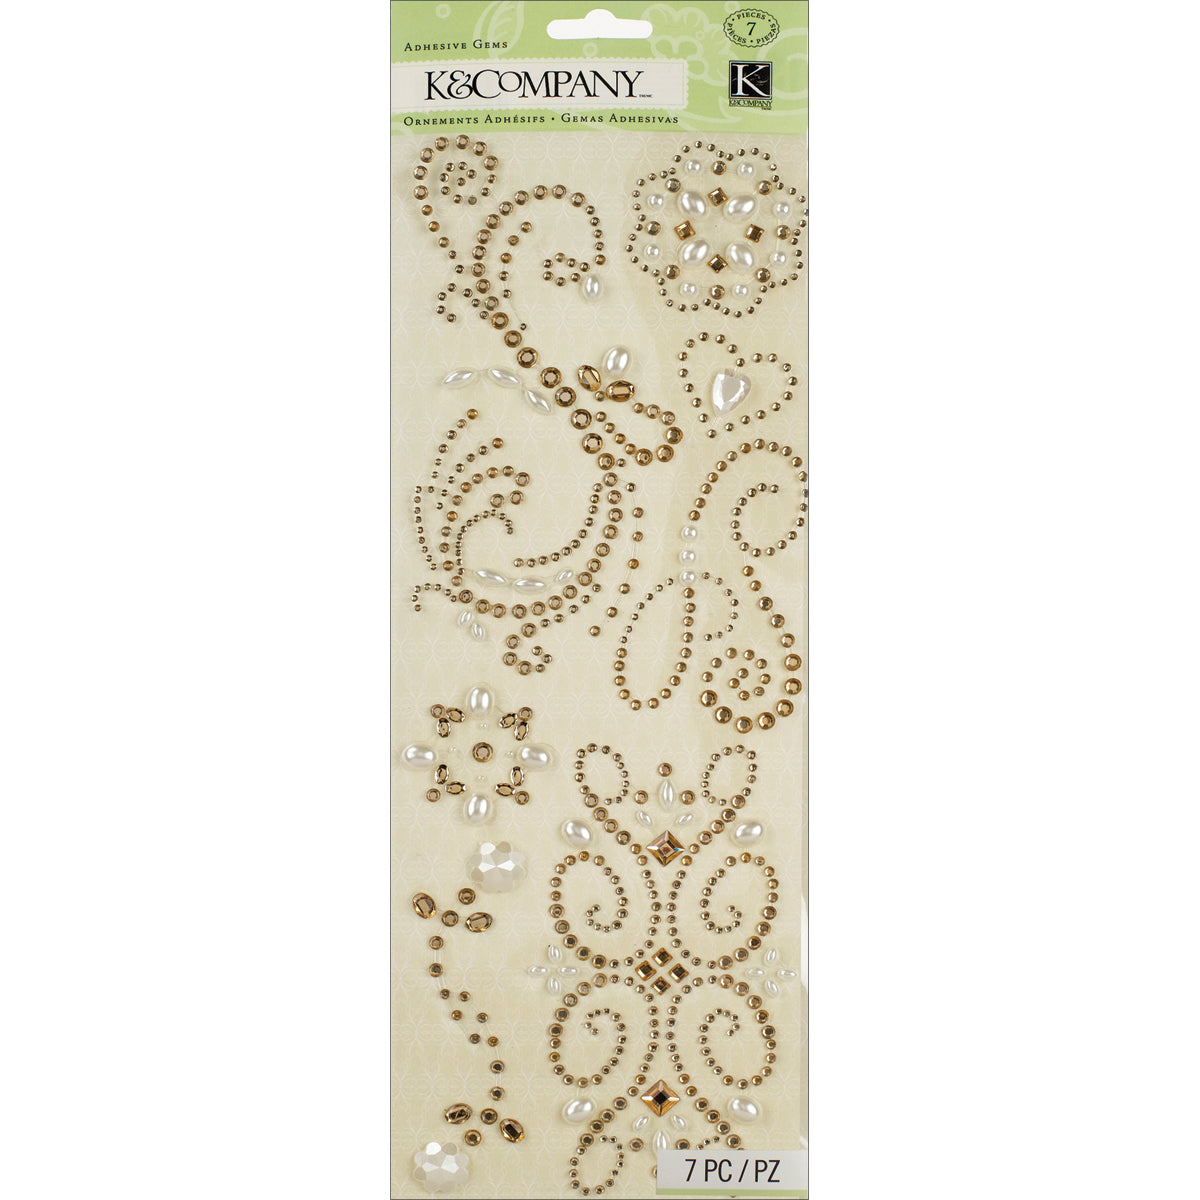 K & Co. -Merryweather Collection - Merryweather Swirl Adhesive Gems